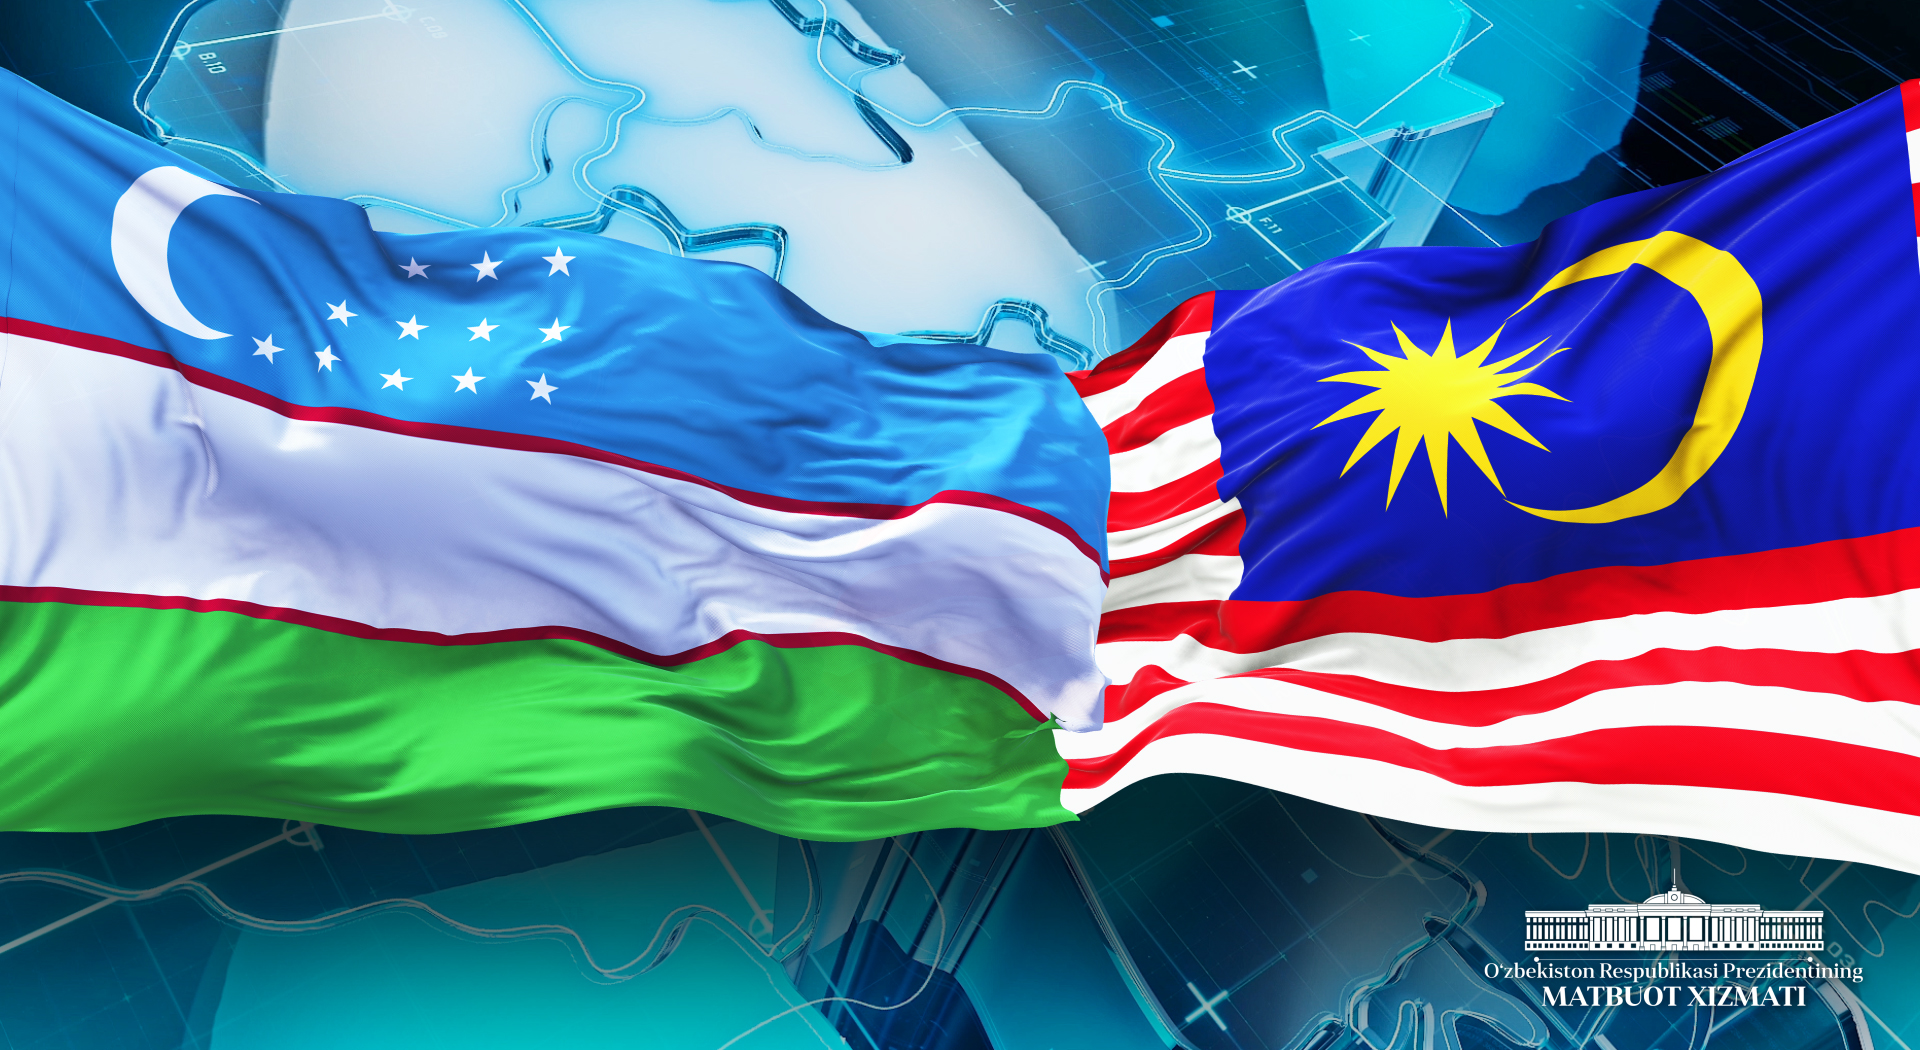 The President of Uzbekistan congratulates the King and the Prime Minister of Malaysia